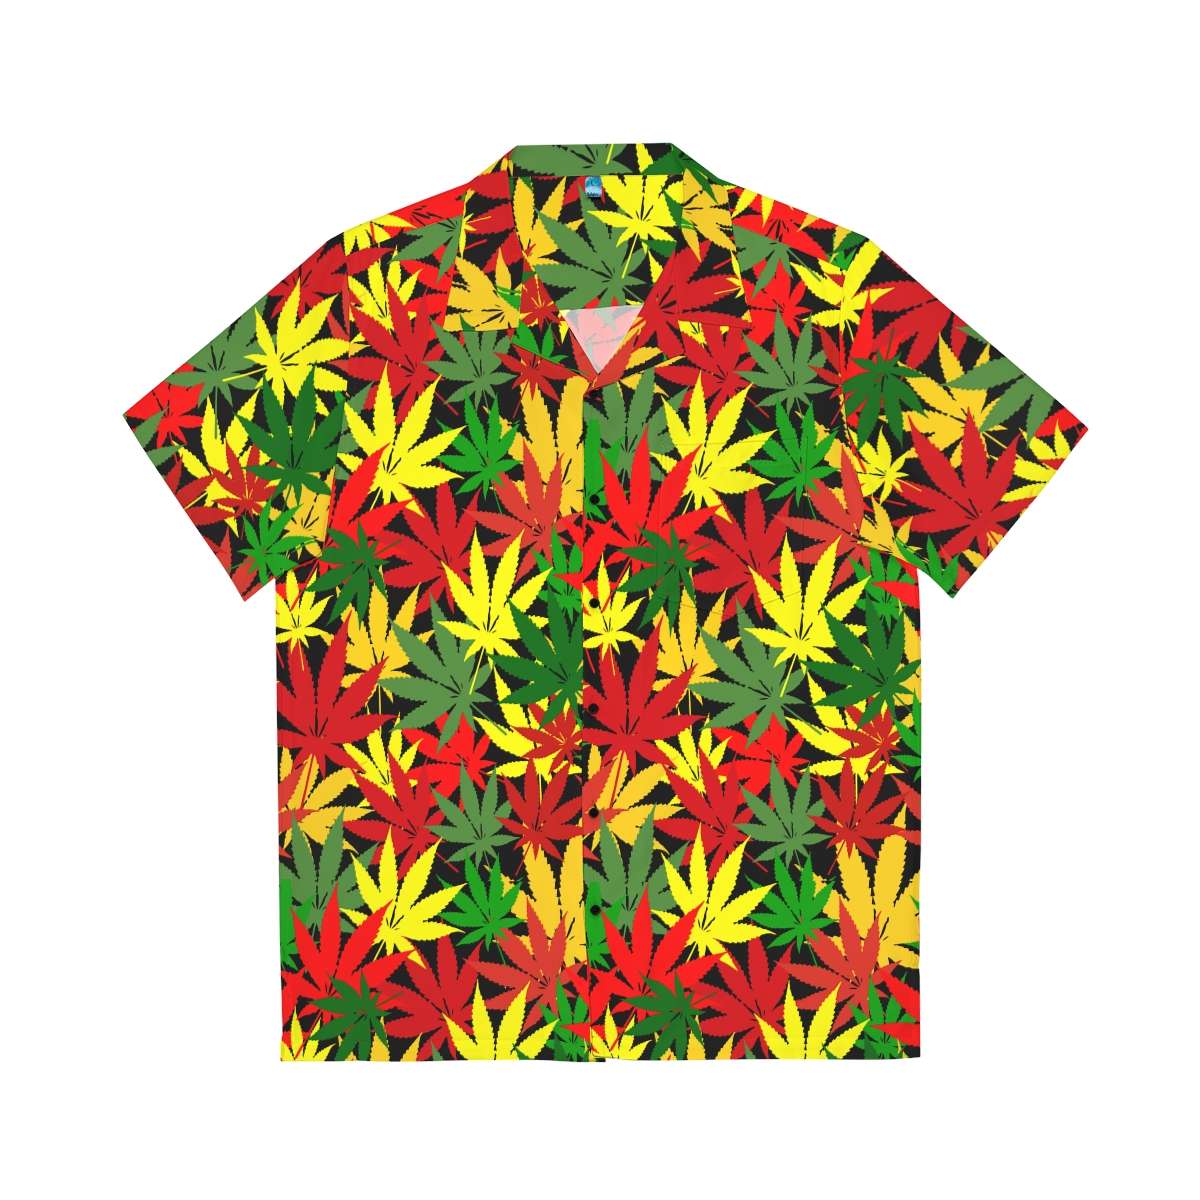 Rasta Hemp Hawaiian Shirt with a hemp leaf pattern in the Rasta colors front view. Cool and comfortable for Summer days and reggae parties.